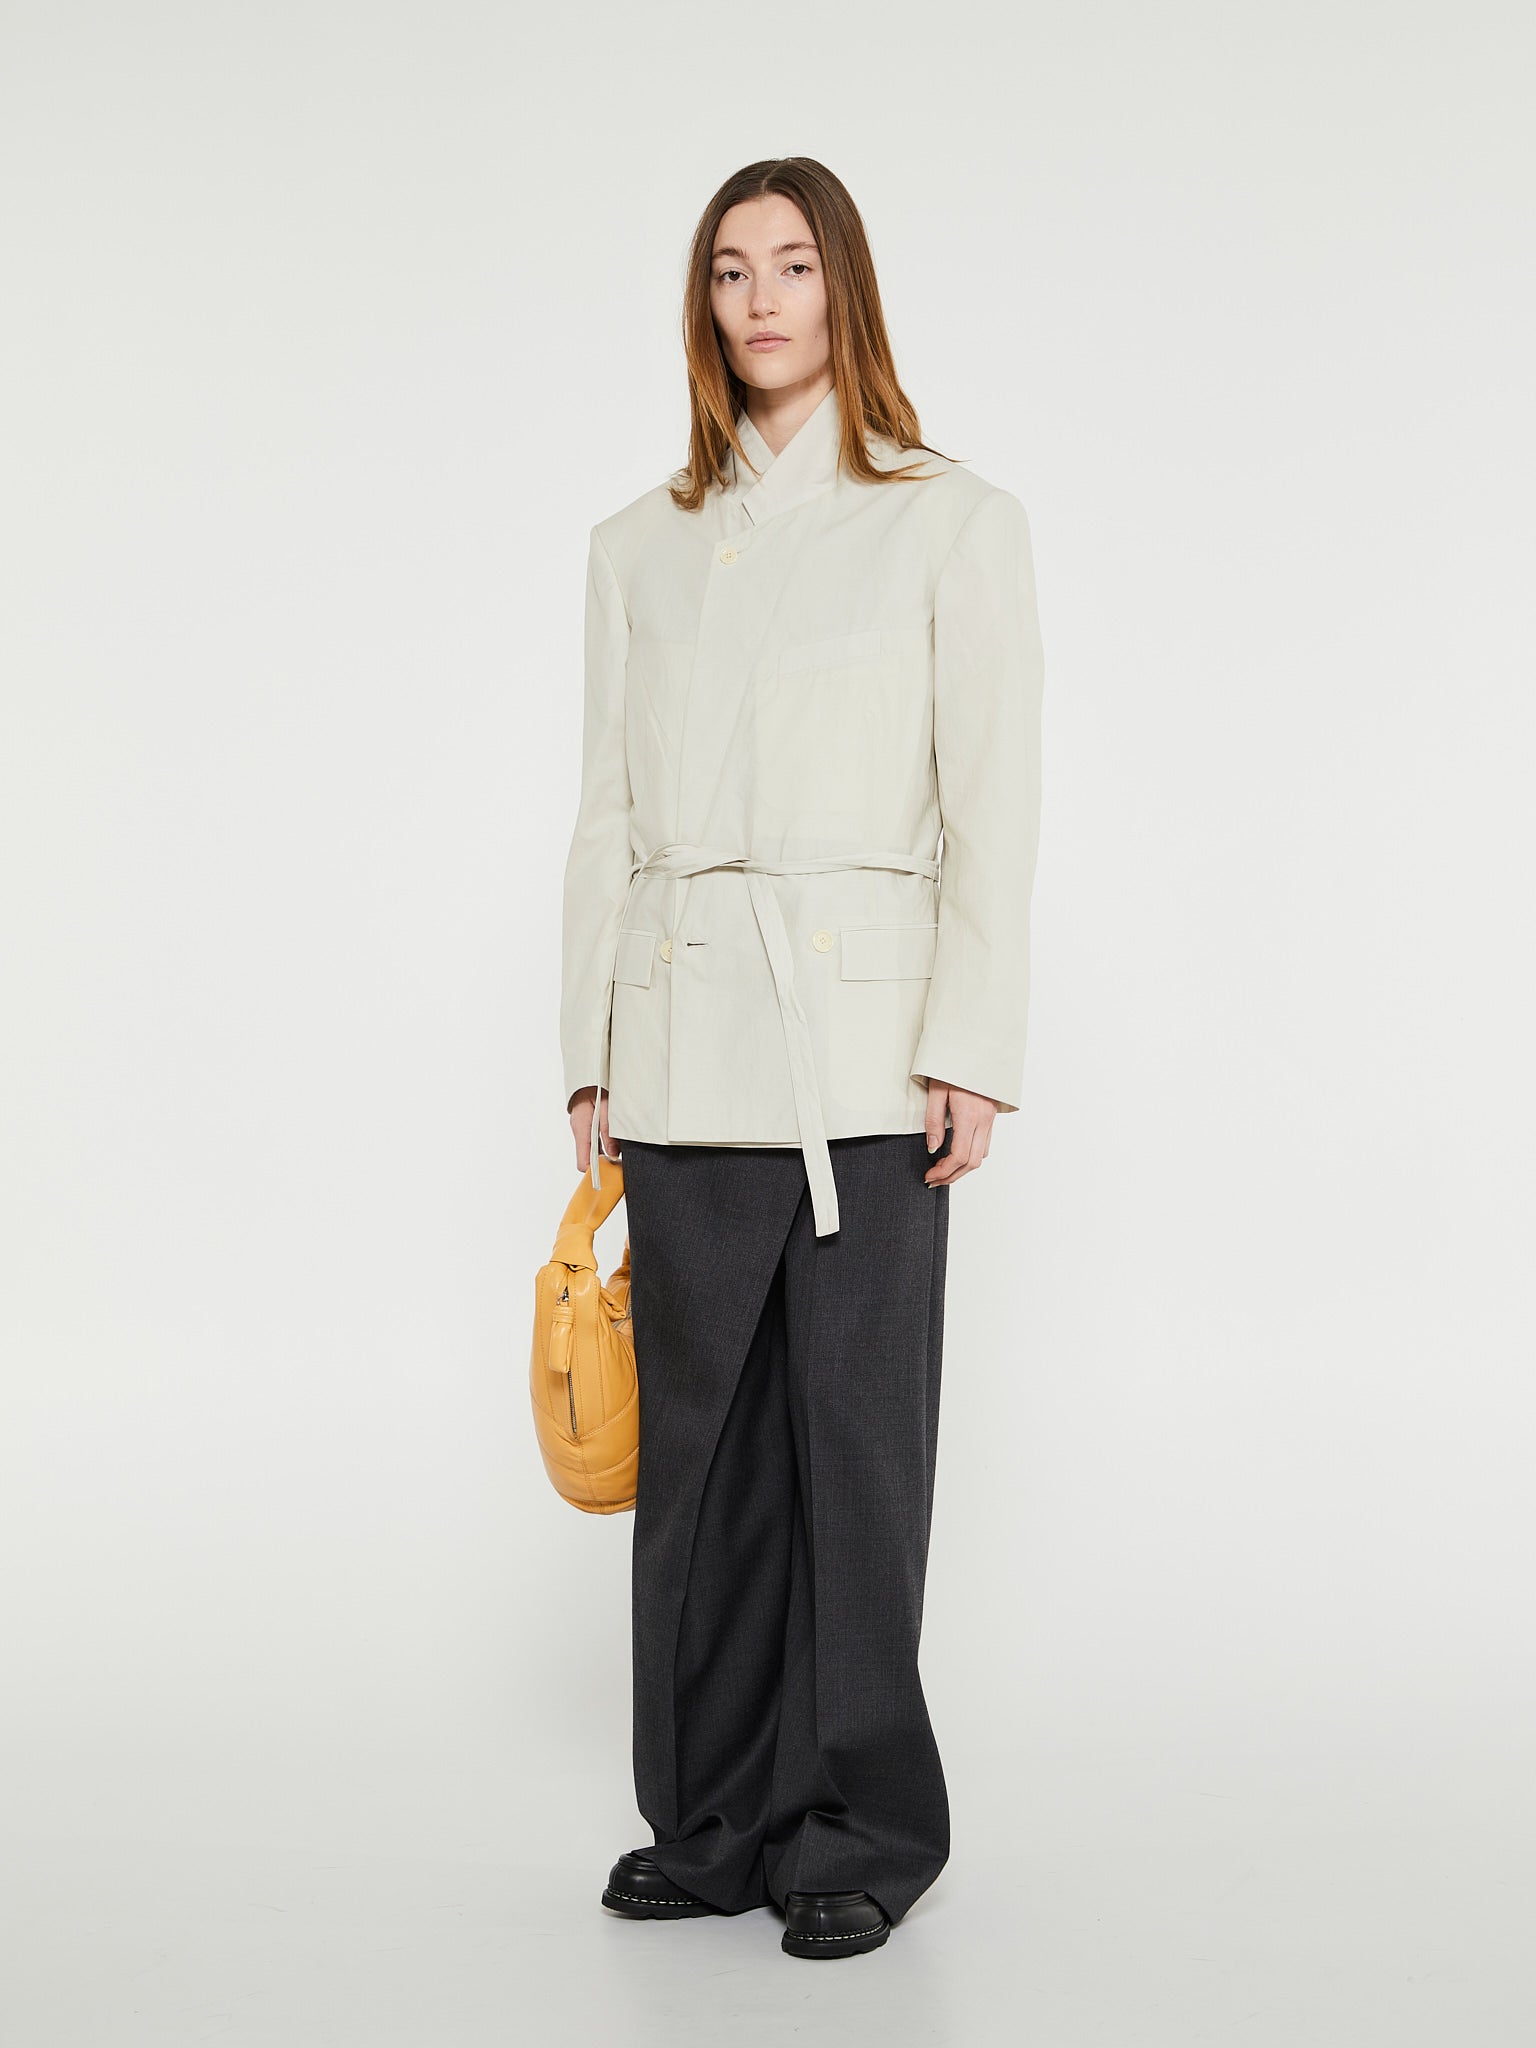 Belted Light Tailored Jacket in Light Grey